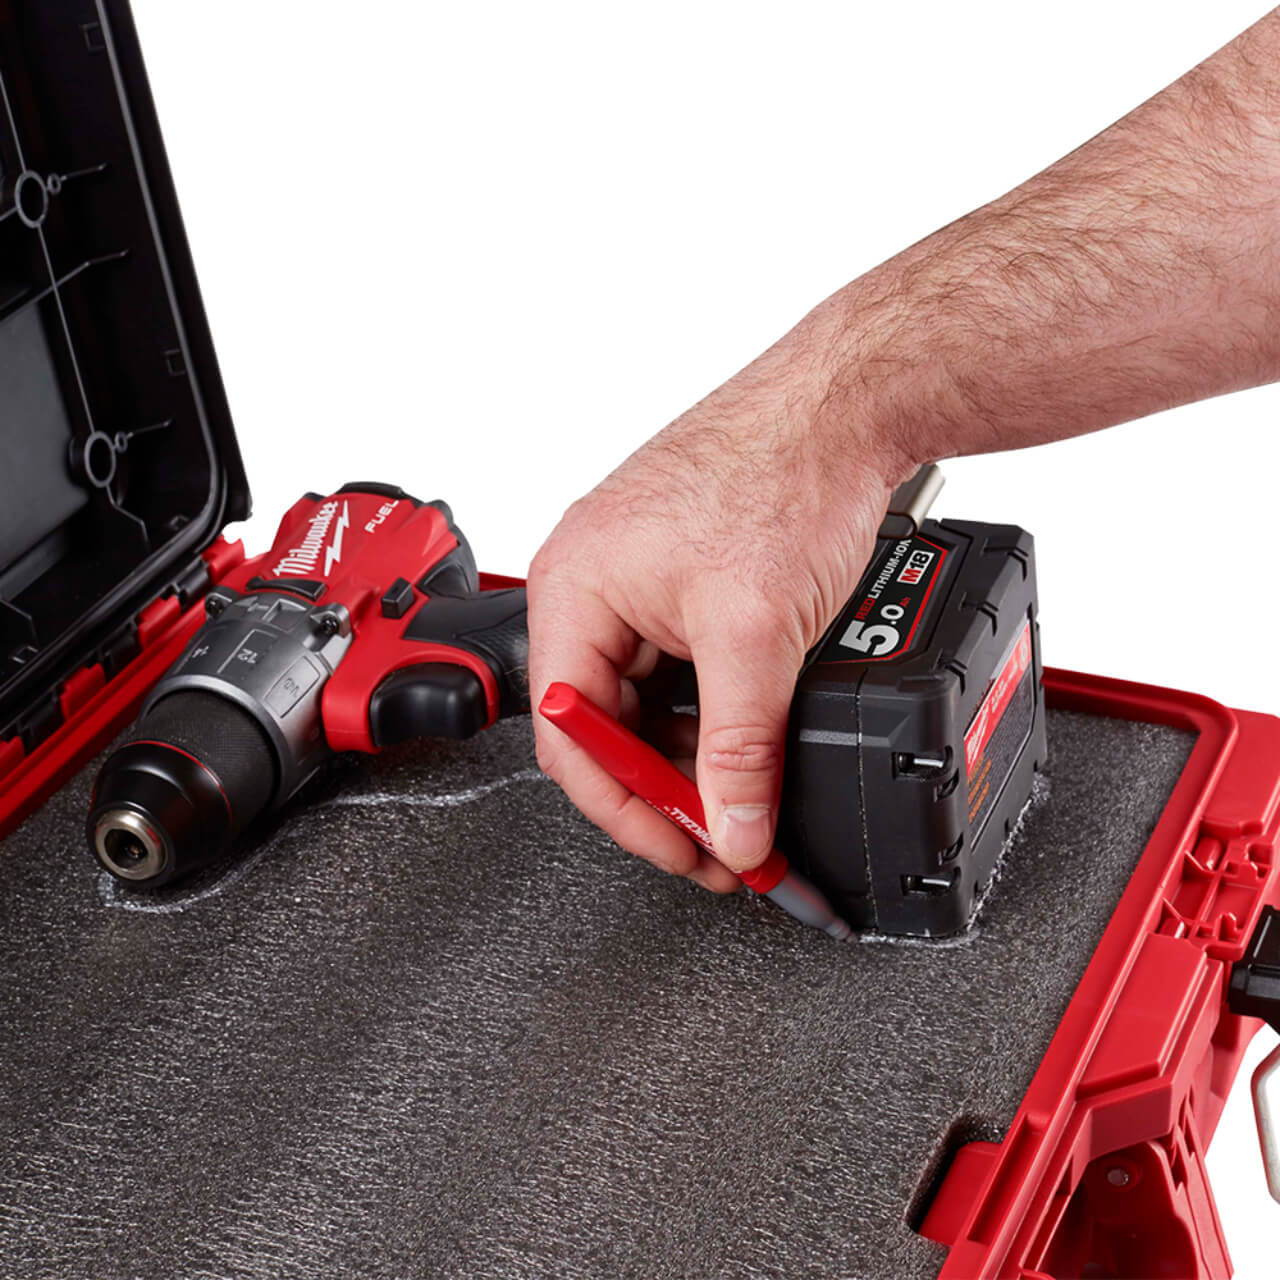 Milwaukee Packout Tool Box with Foam Insert